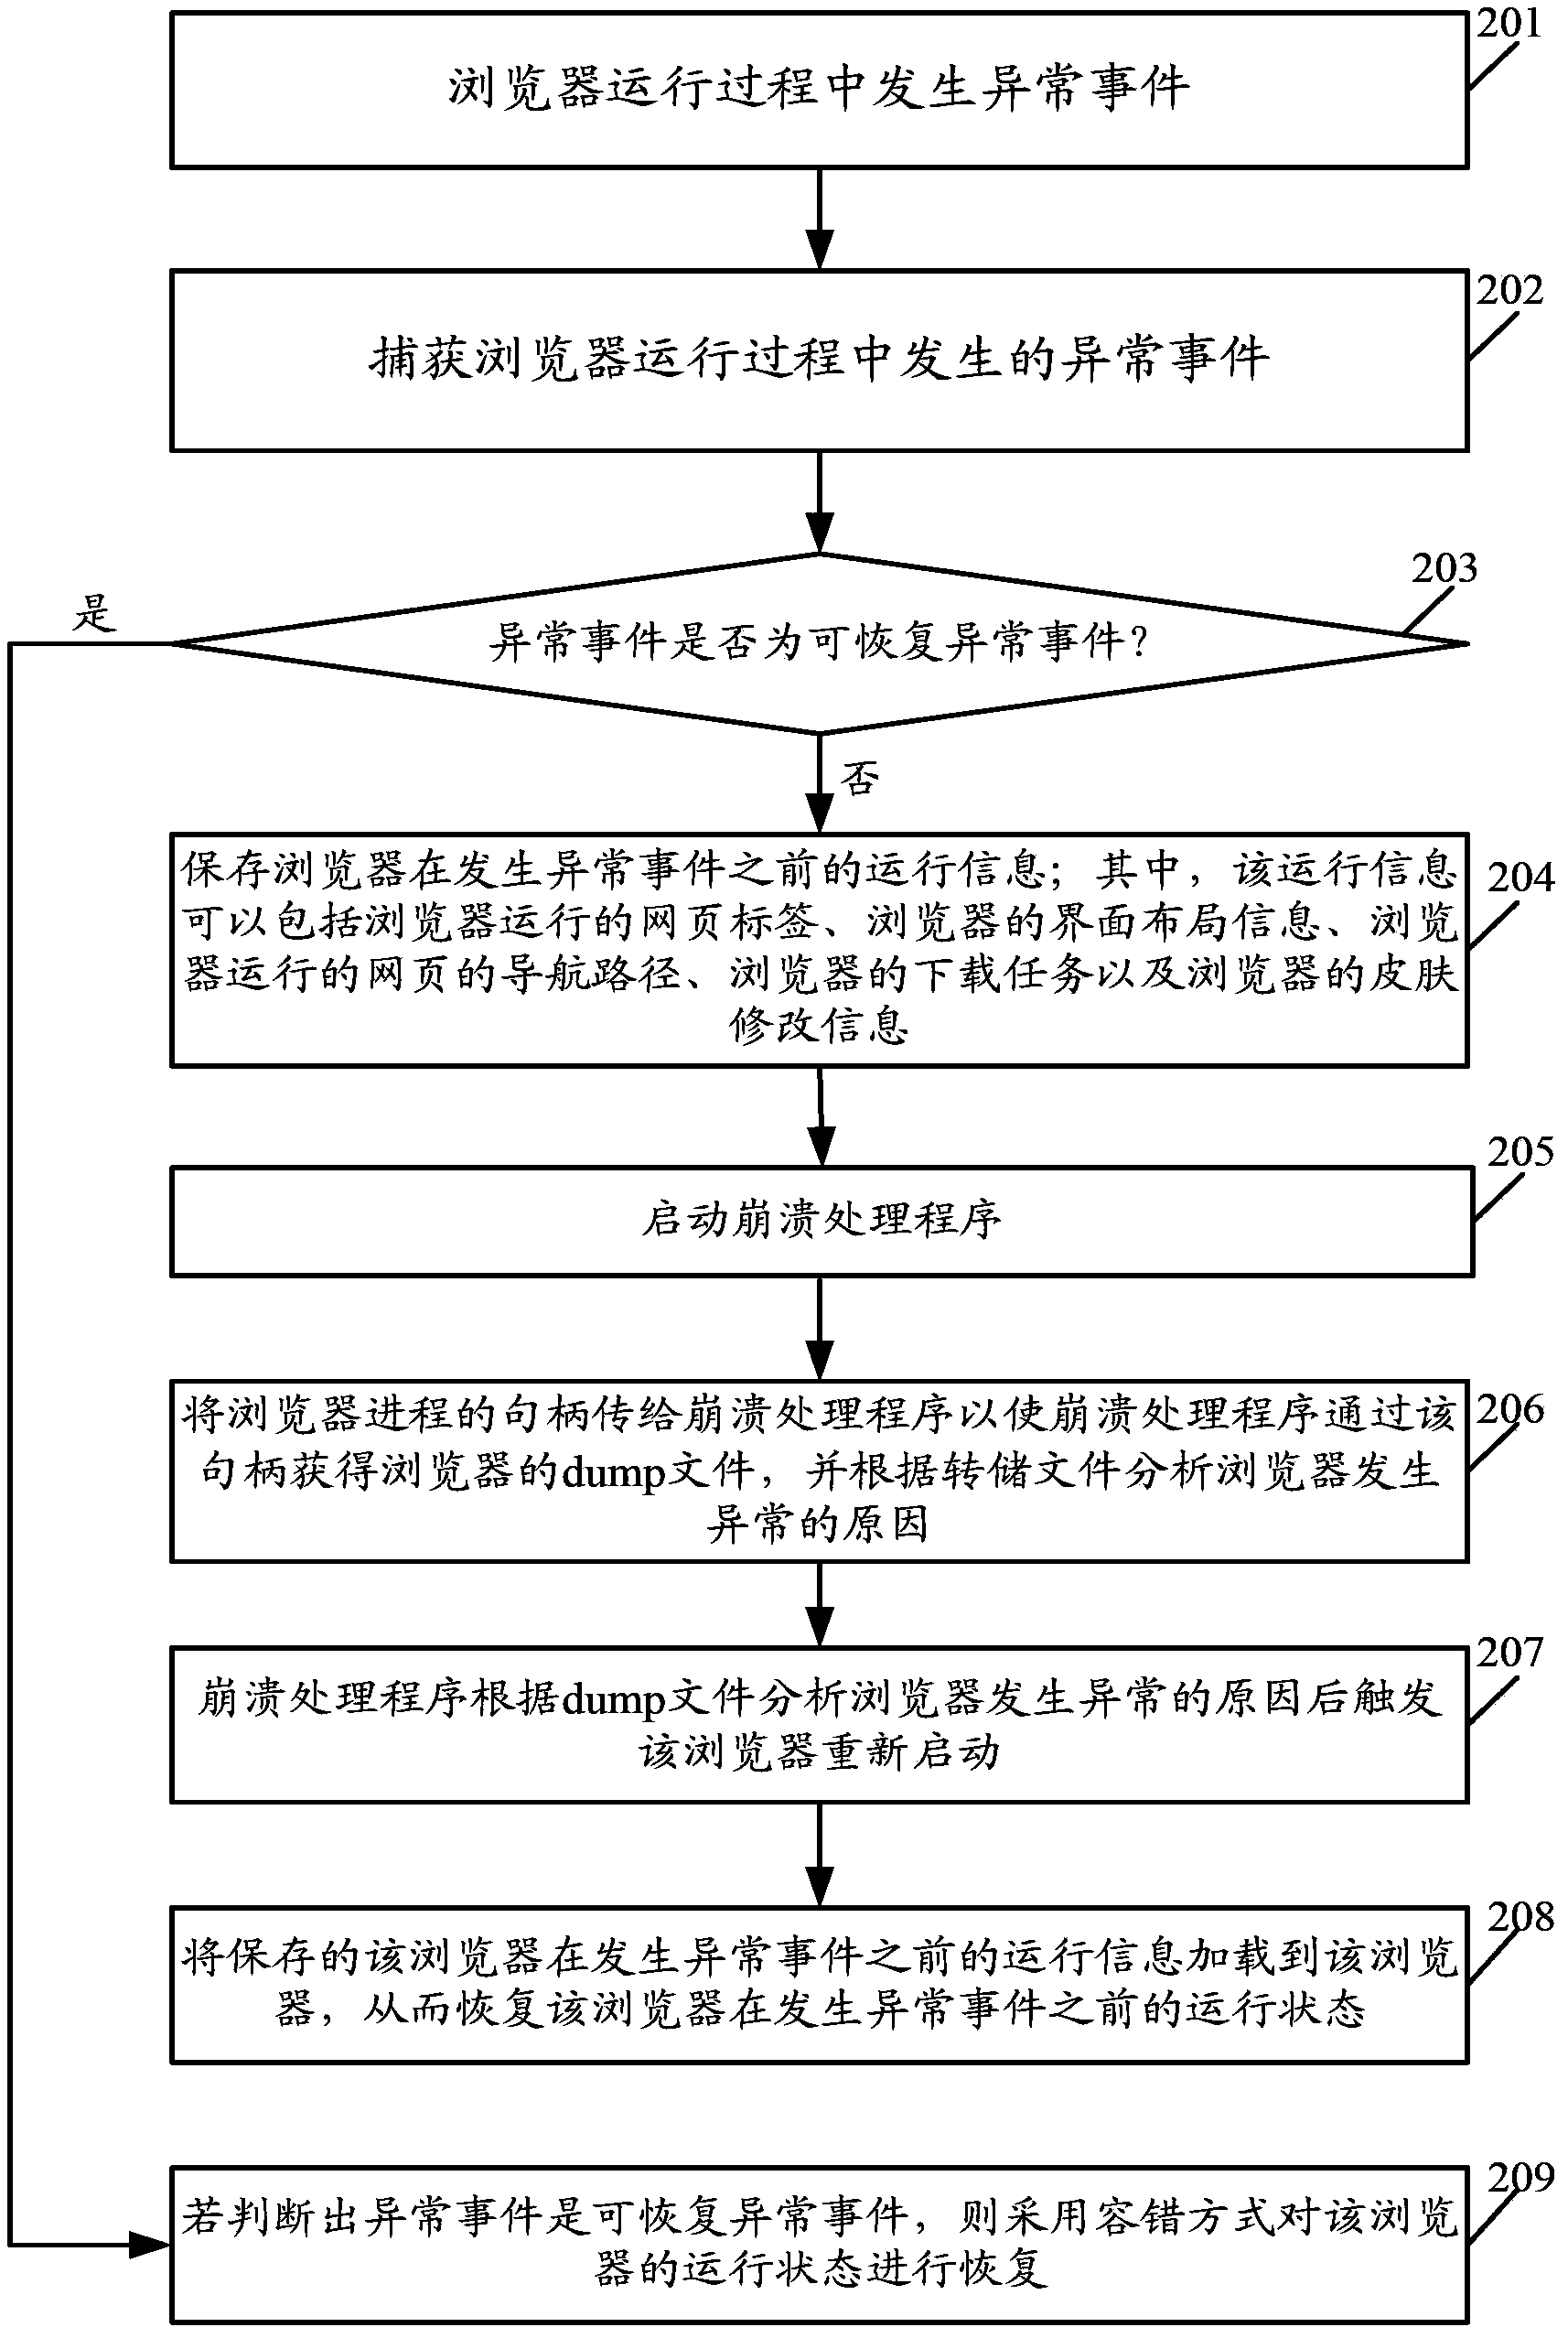 Method and device for automatically restoring browser